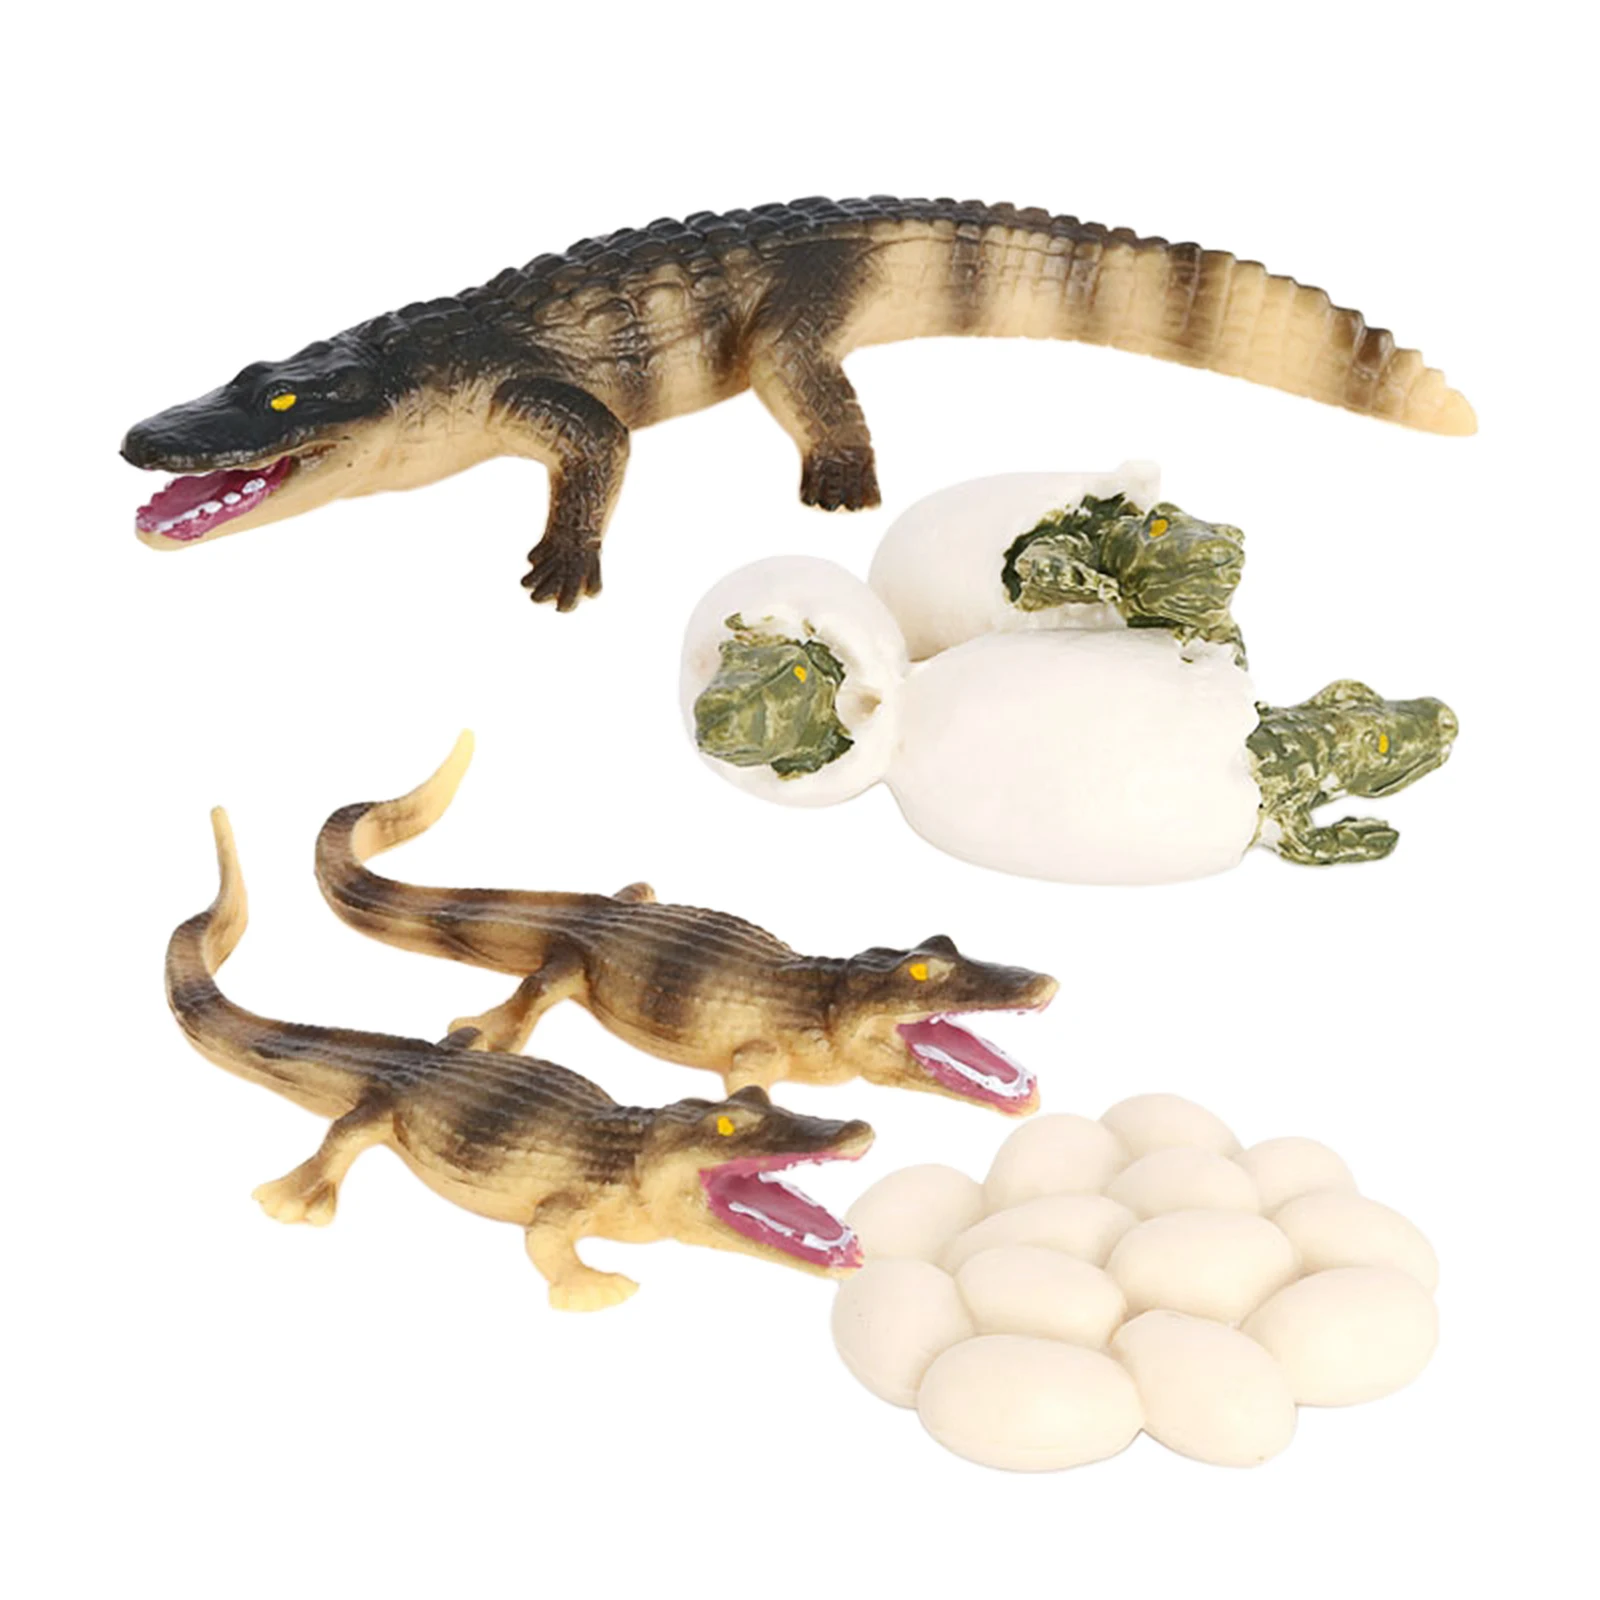 Life Cycle of a CrocodileNature Insects Life Cycles Growth Model Game PropSimulation Insect Animal Natural Education Toy